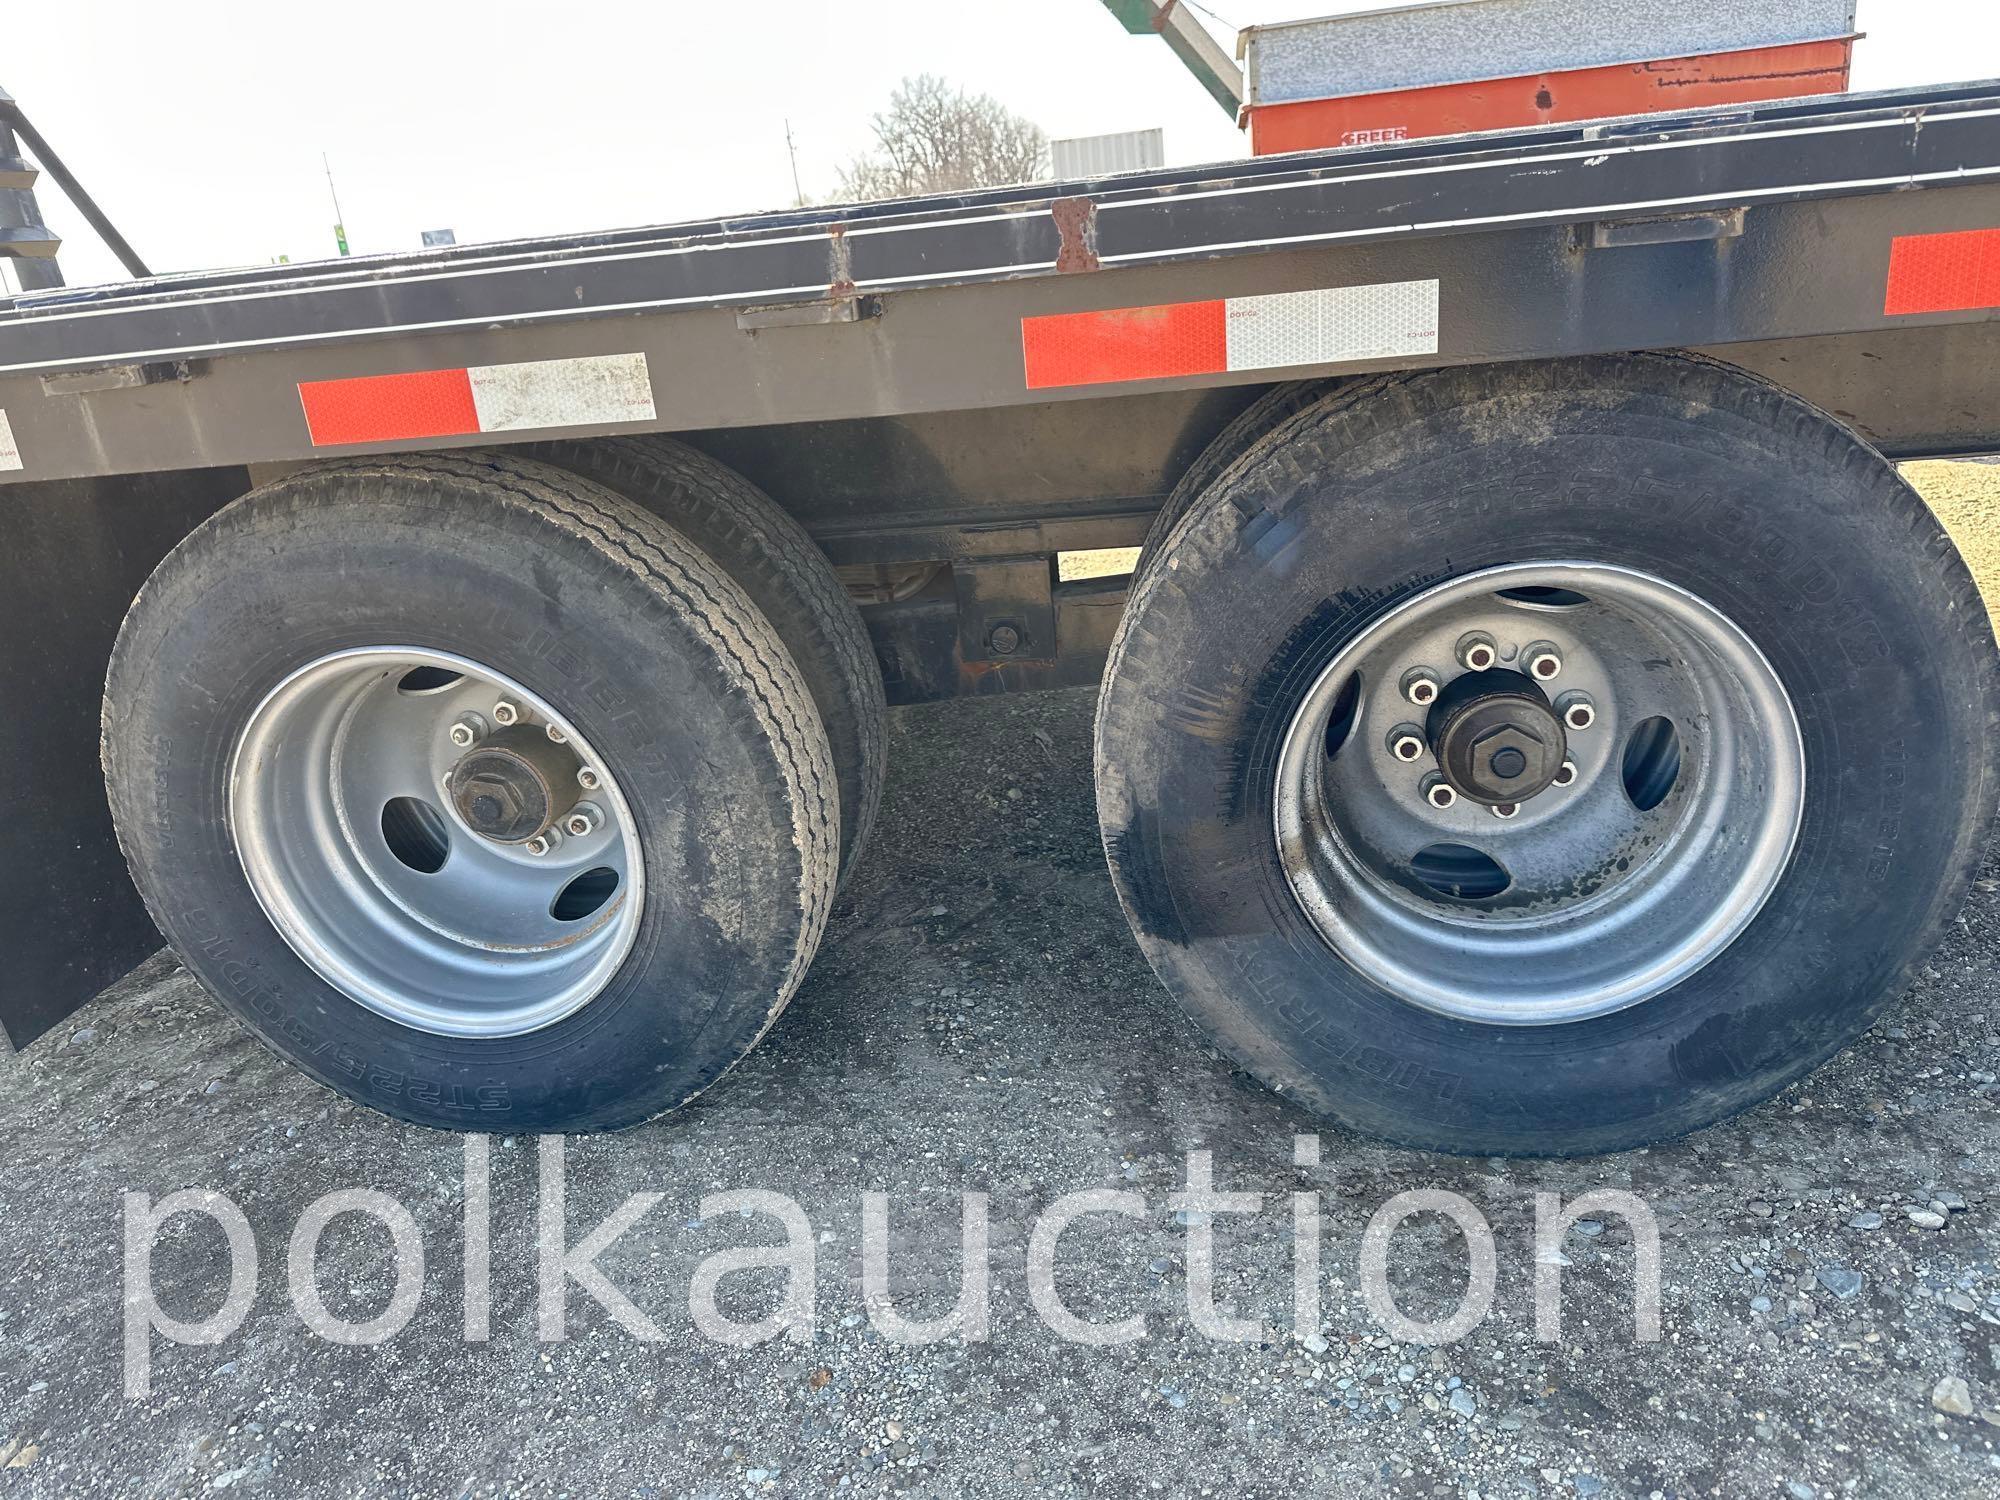 3215-(2013) KAUFFMAN FLATBED TRAILER (VIN# SVGFH2321DL003121)(TITLE AVAILABLE)